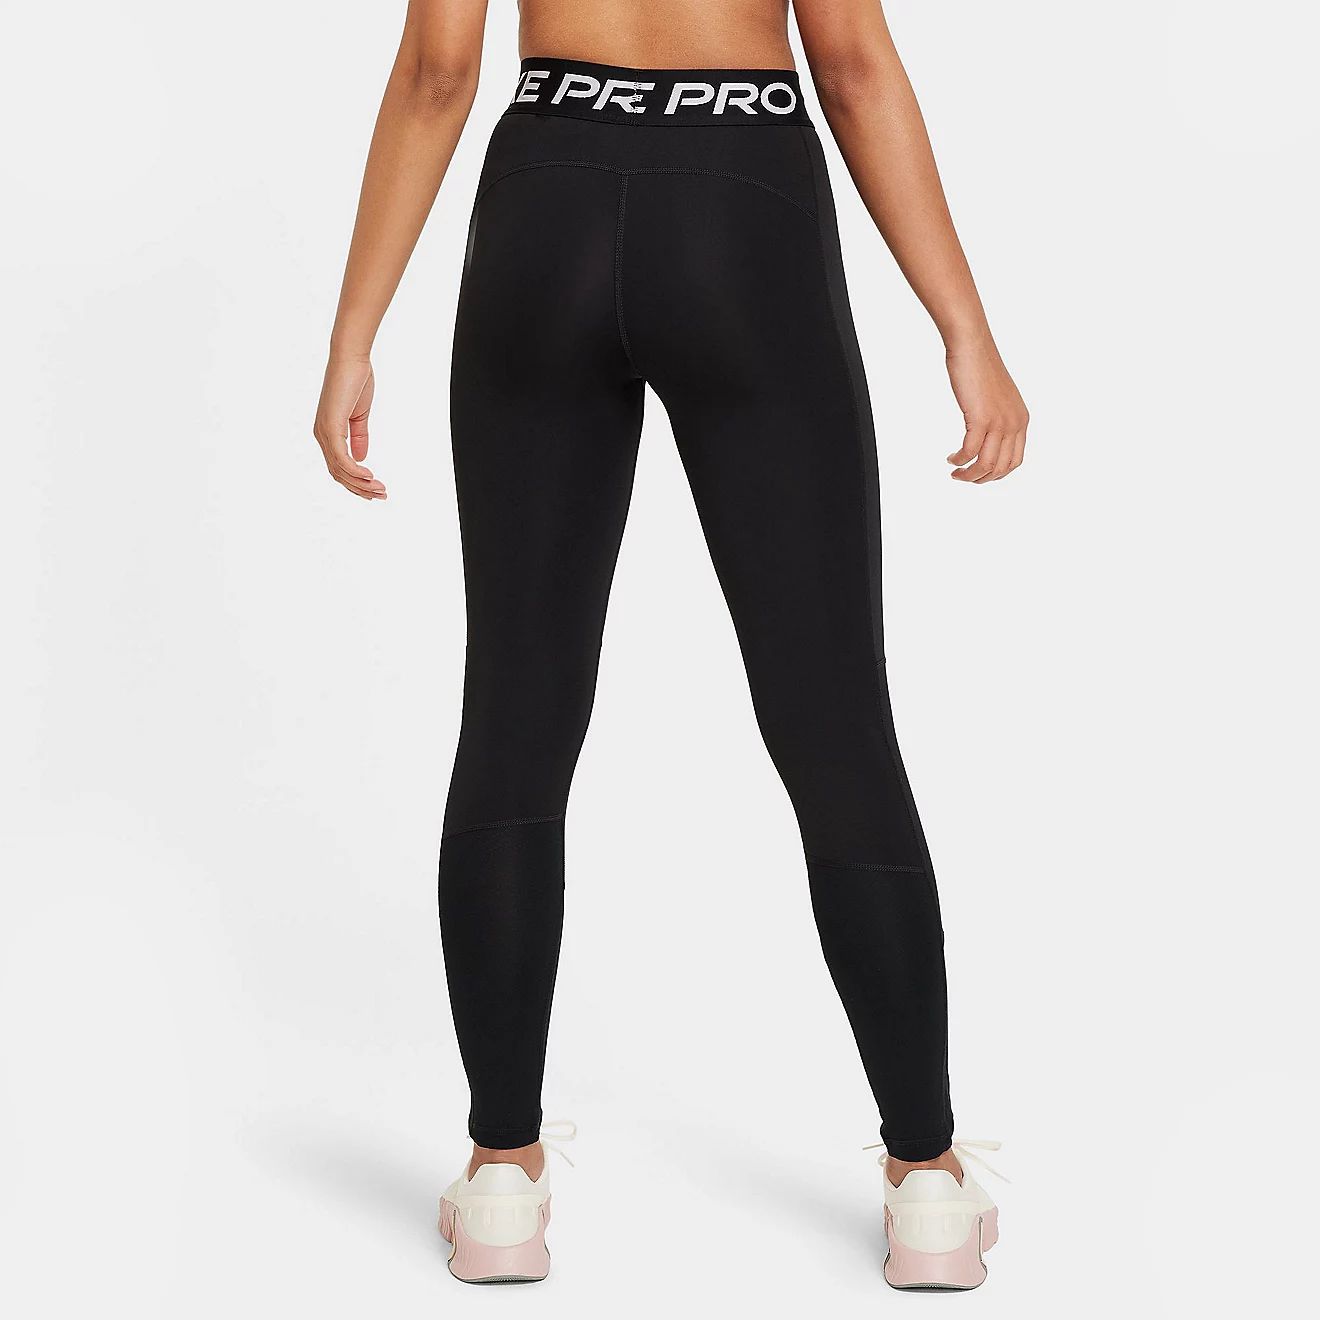 Nike Girls’ Pro Dri-FIT Tights | Free Shipping at Academy | Academy Sports + Outdoors